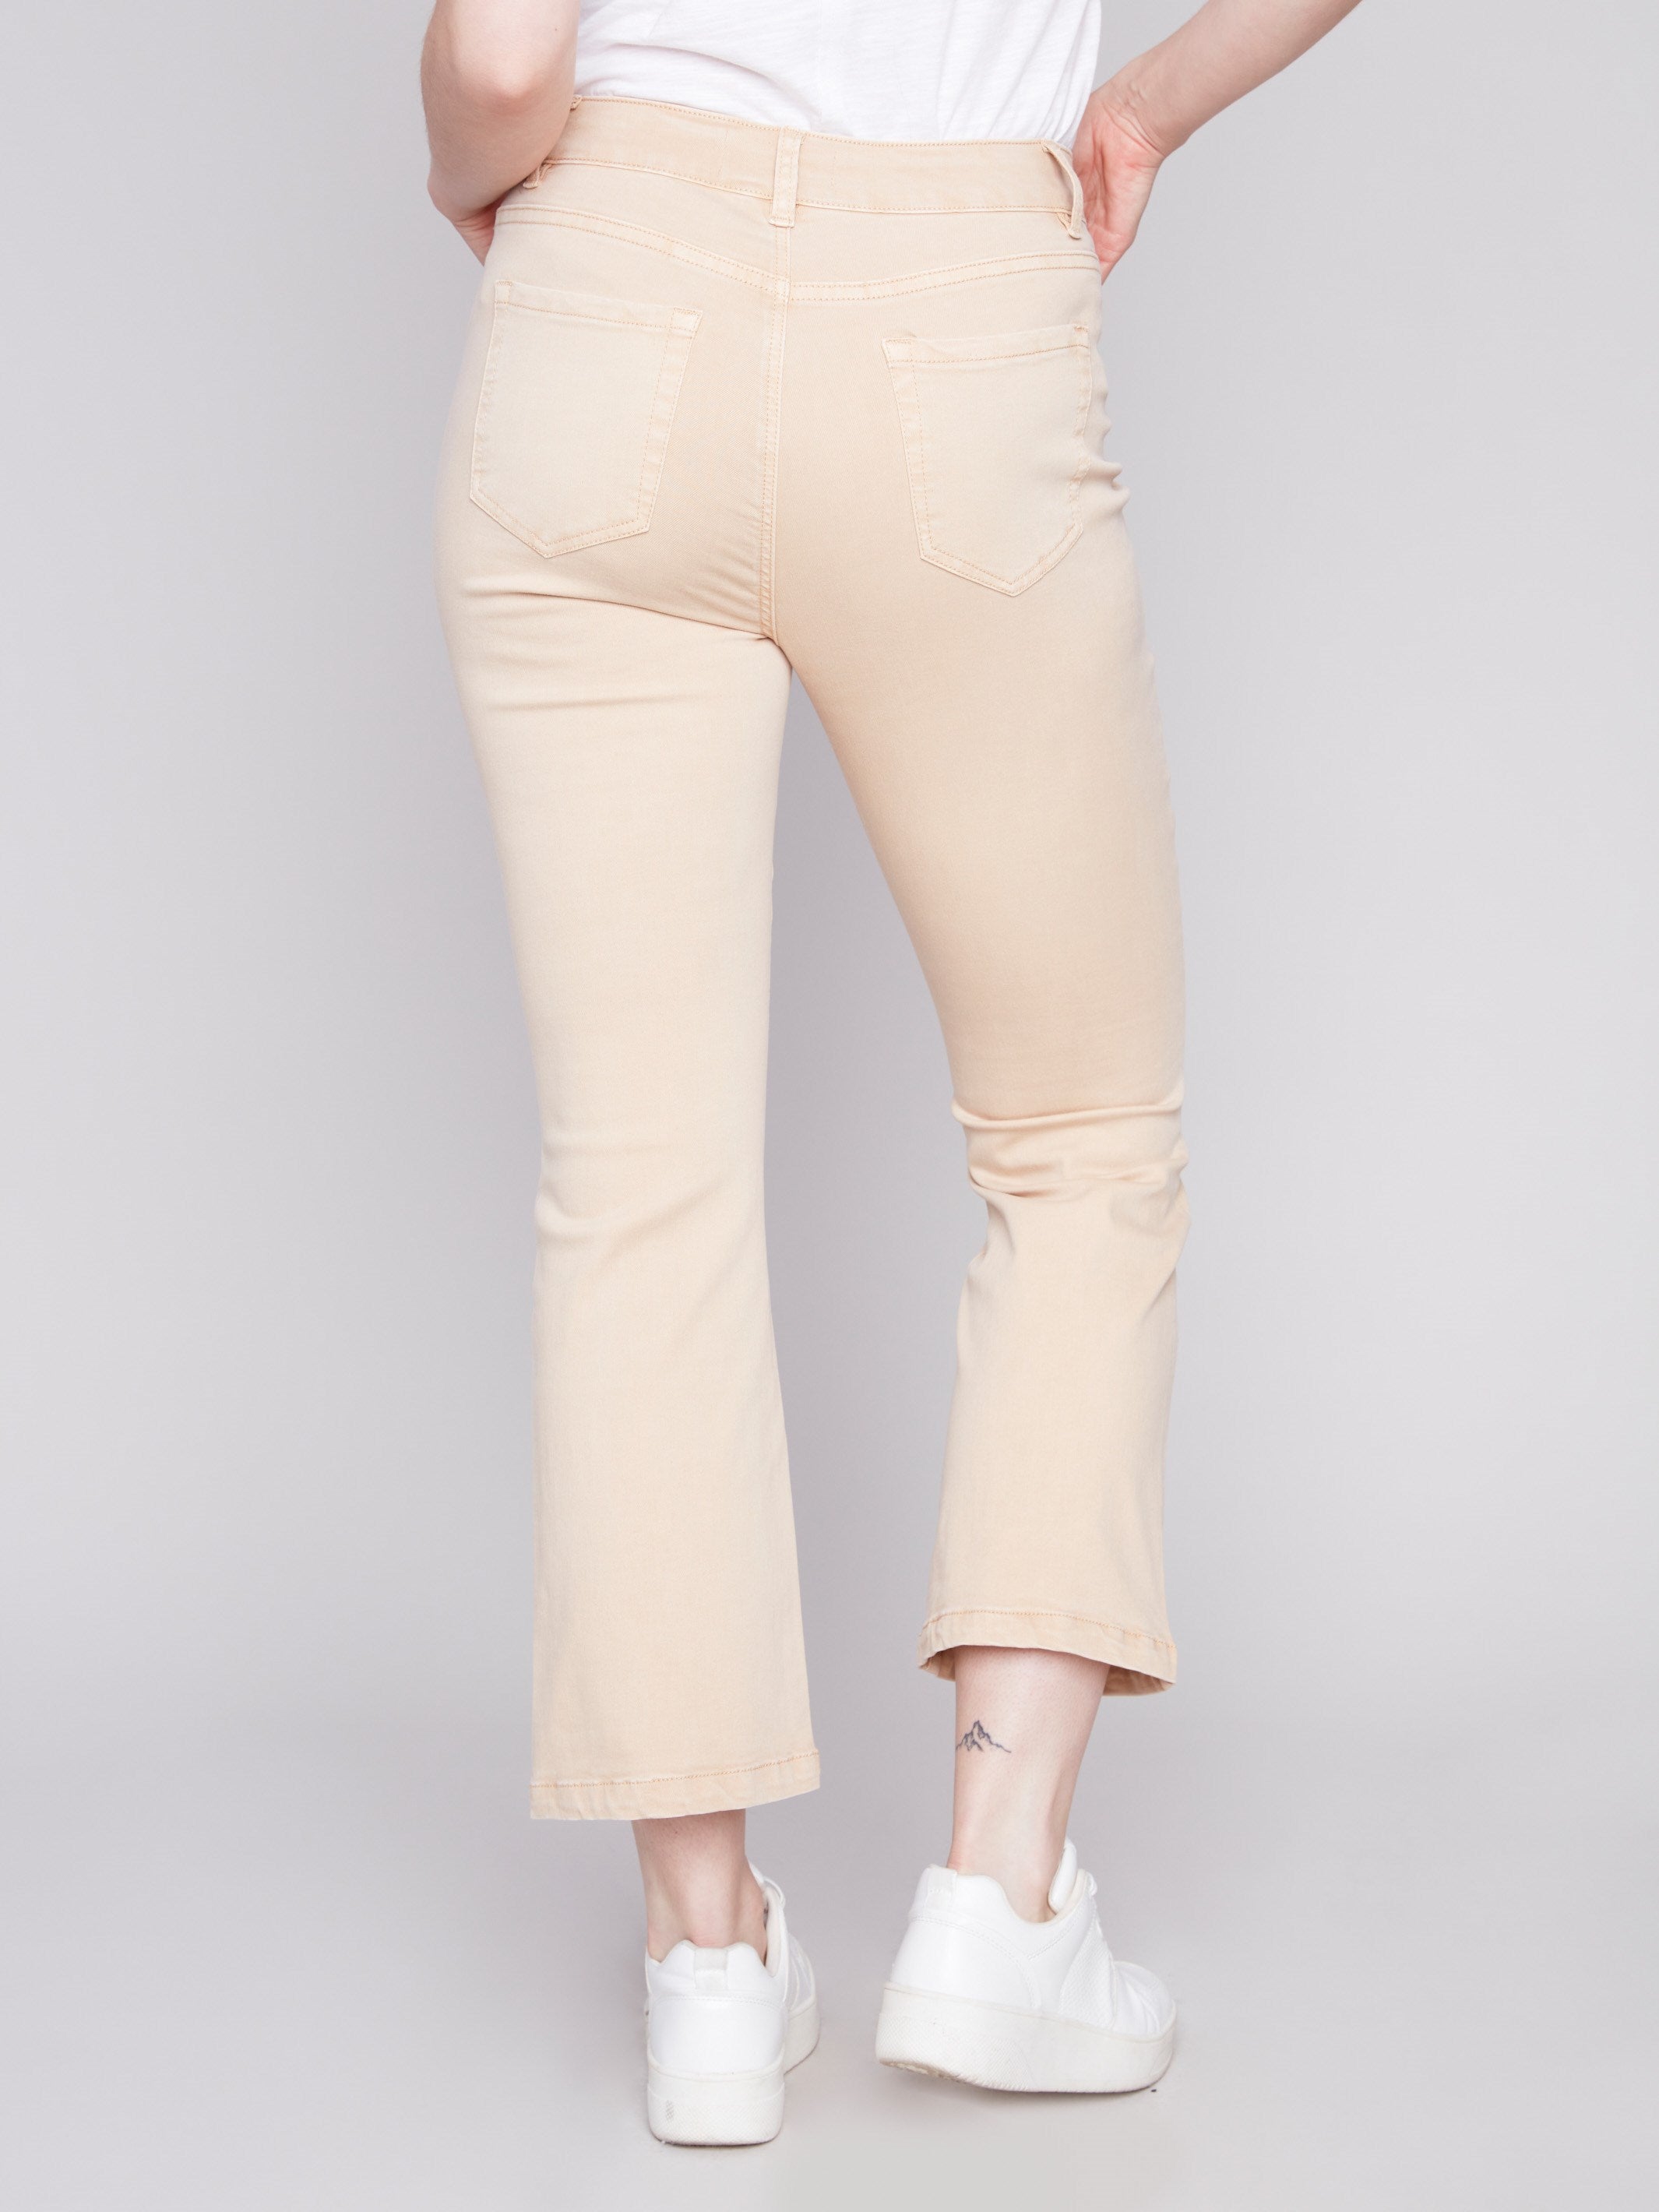 Bootcut Stretch Twill Pants - Corn - Charlie B Collection Canada - Image 3